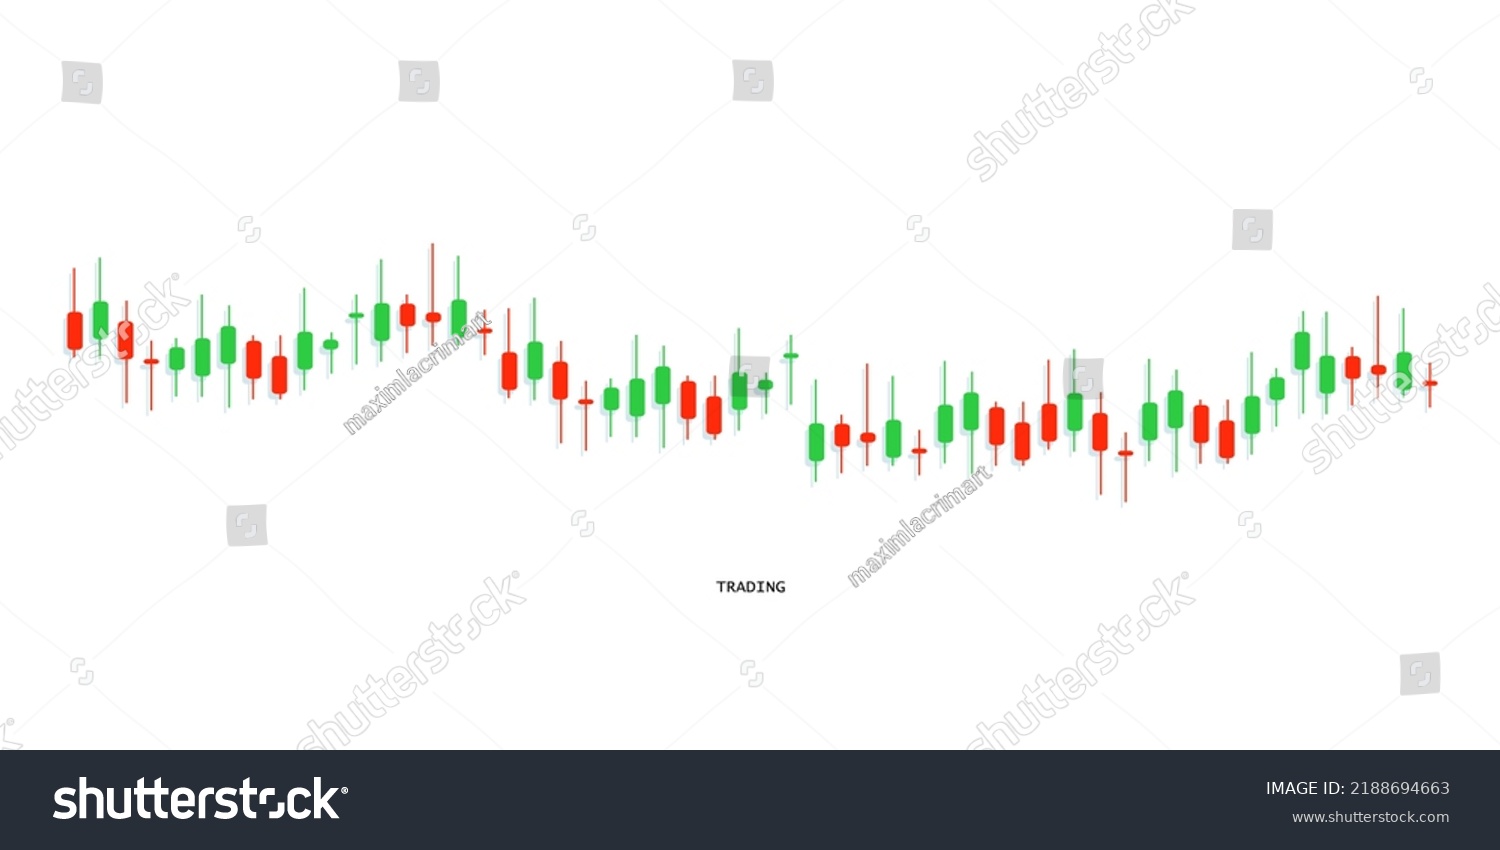 SVG of Charts pattern trading illustration with candles. Rise and fall graph. Vector EPS 10 svg